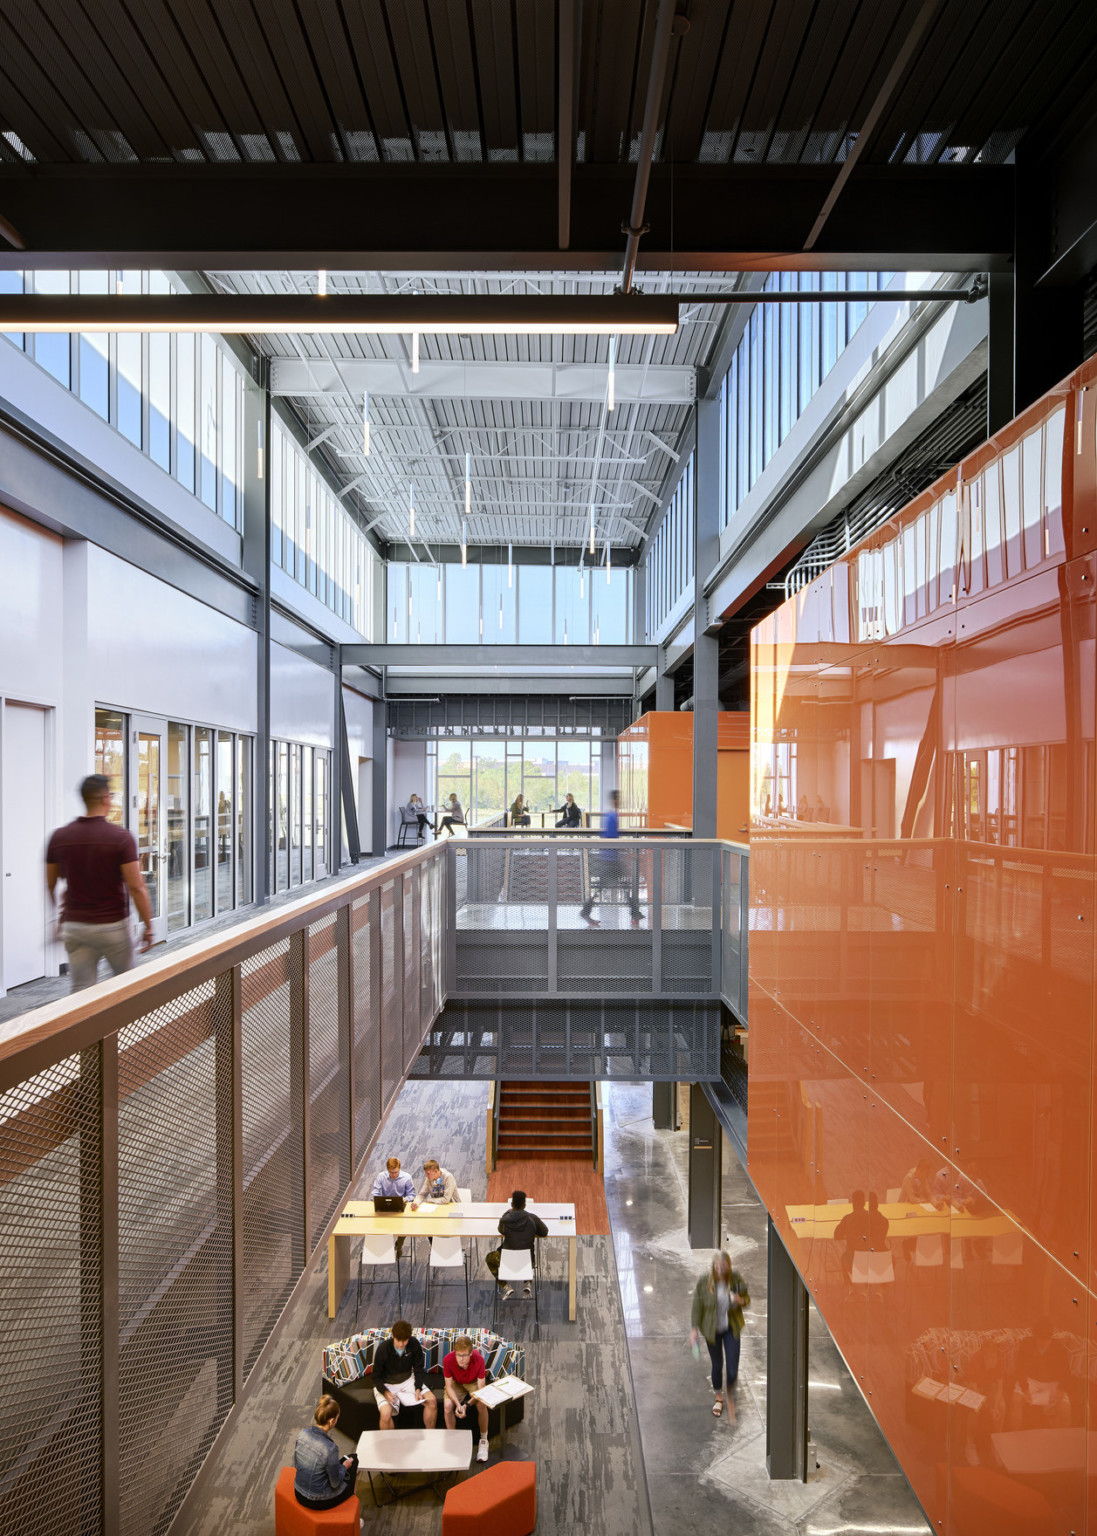 View of atrium from 2nd floor walkway ending in double height windows. Orange walls on the right, and a seating area below